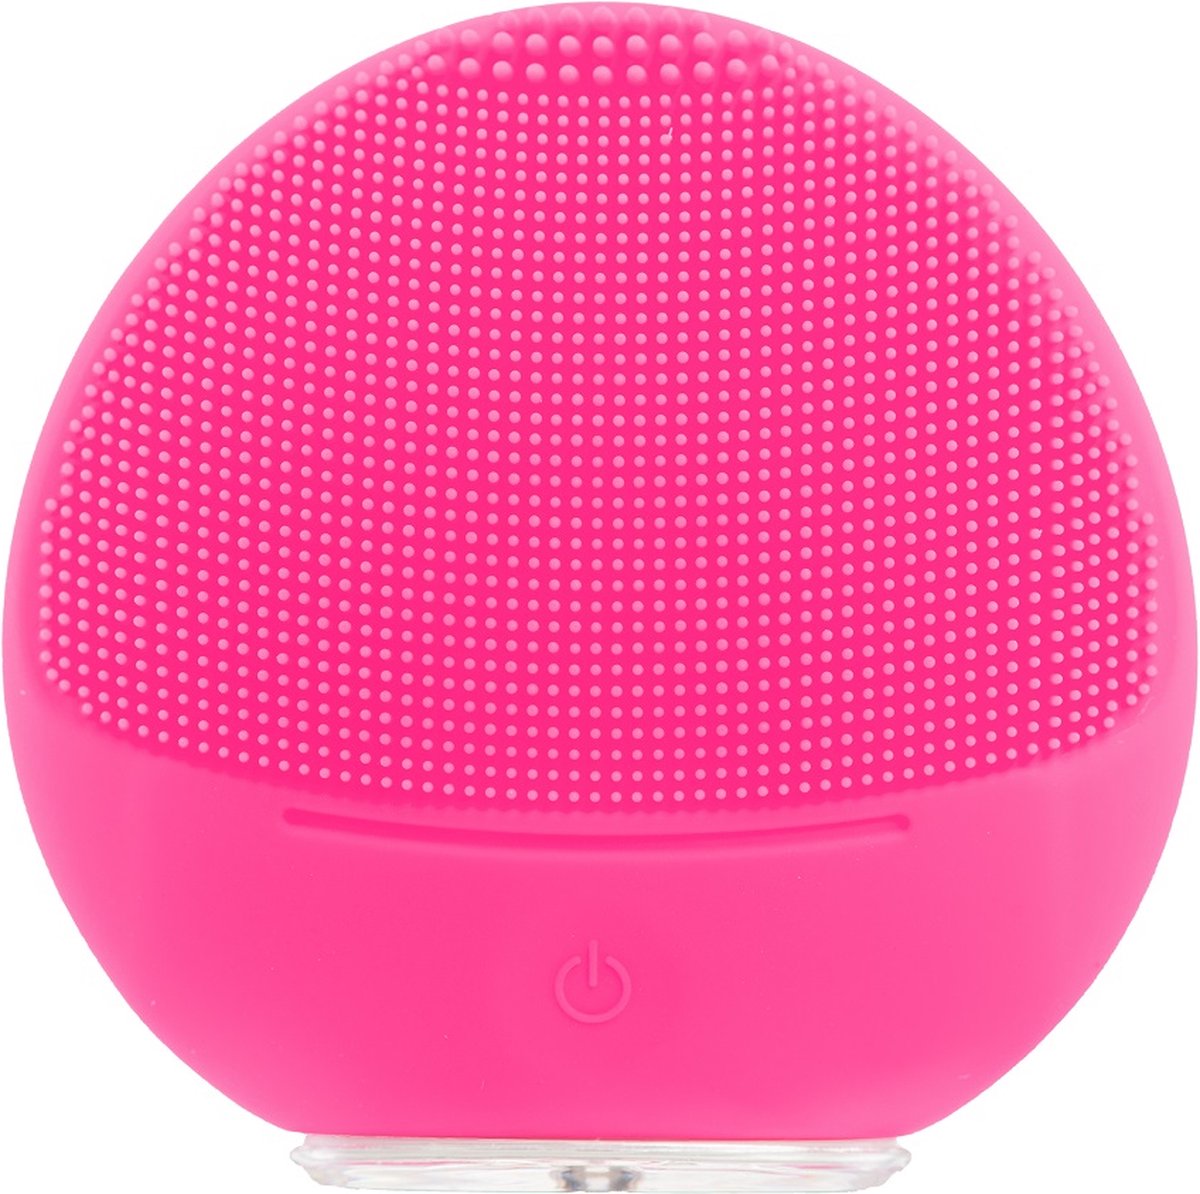 Purederm - Silicone Sonic Face Brush Pink